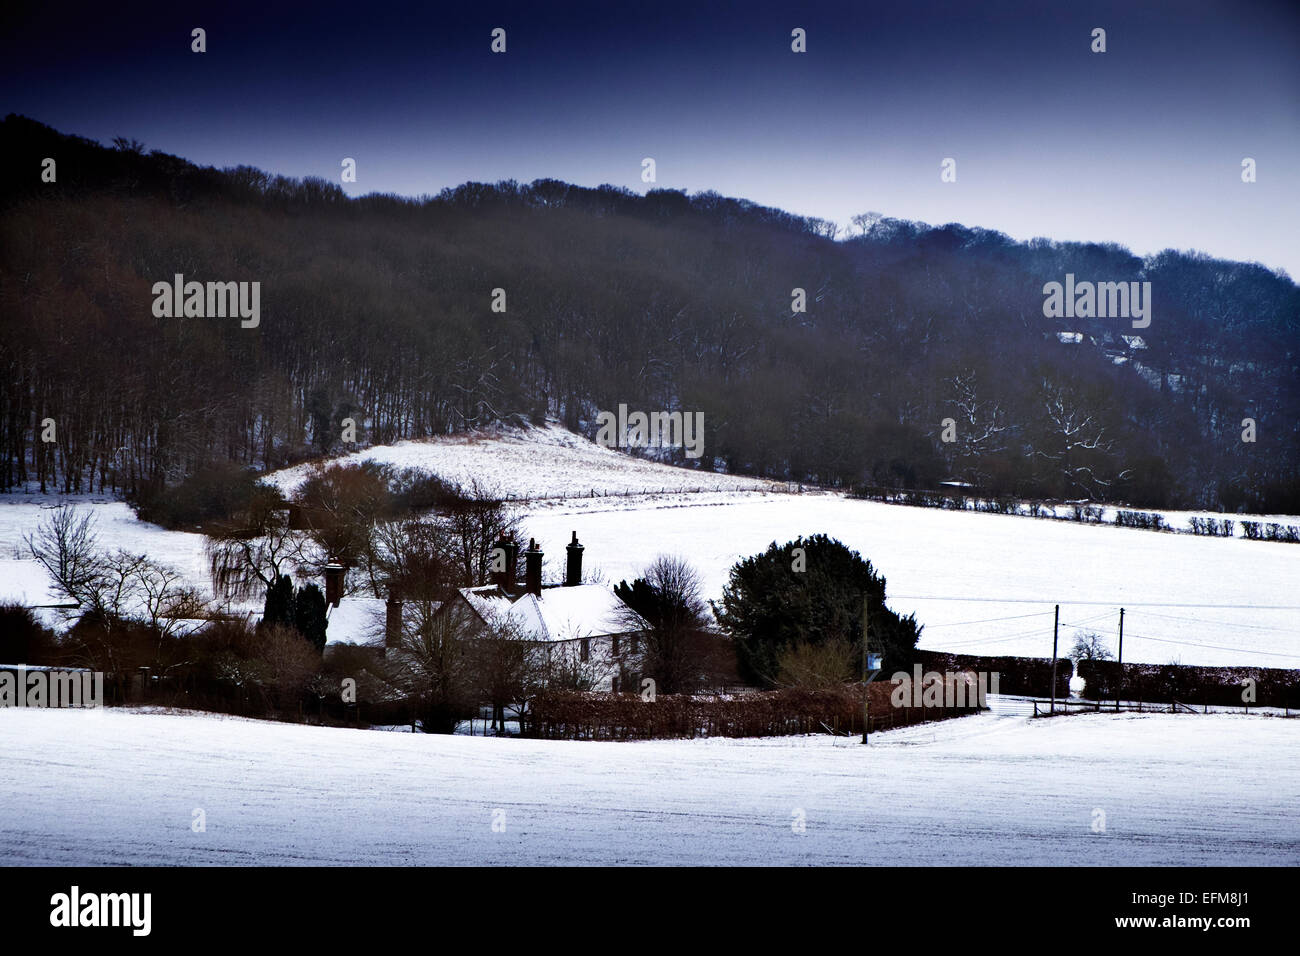 A Winter snow covered landscape in Hertfordshire countryside near Aldbury. Stock Photo